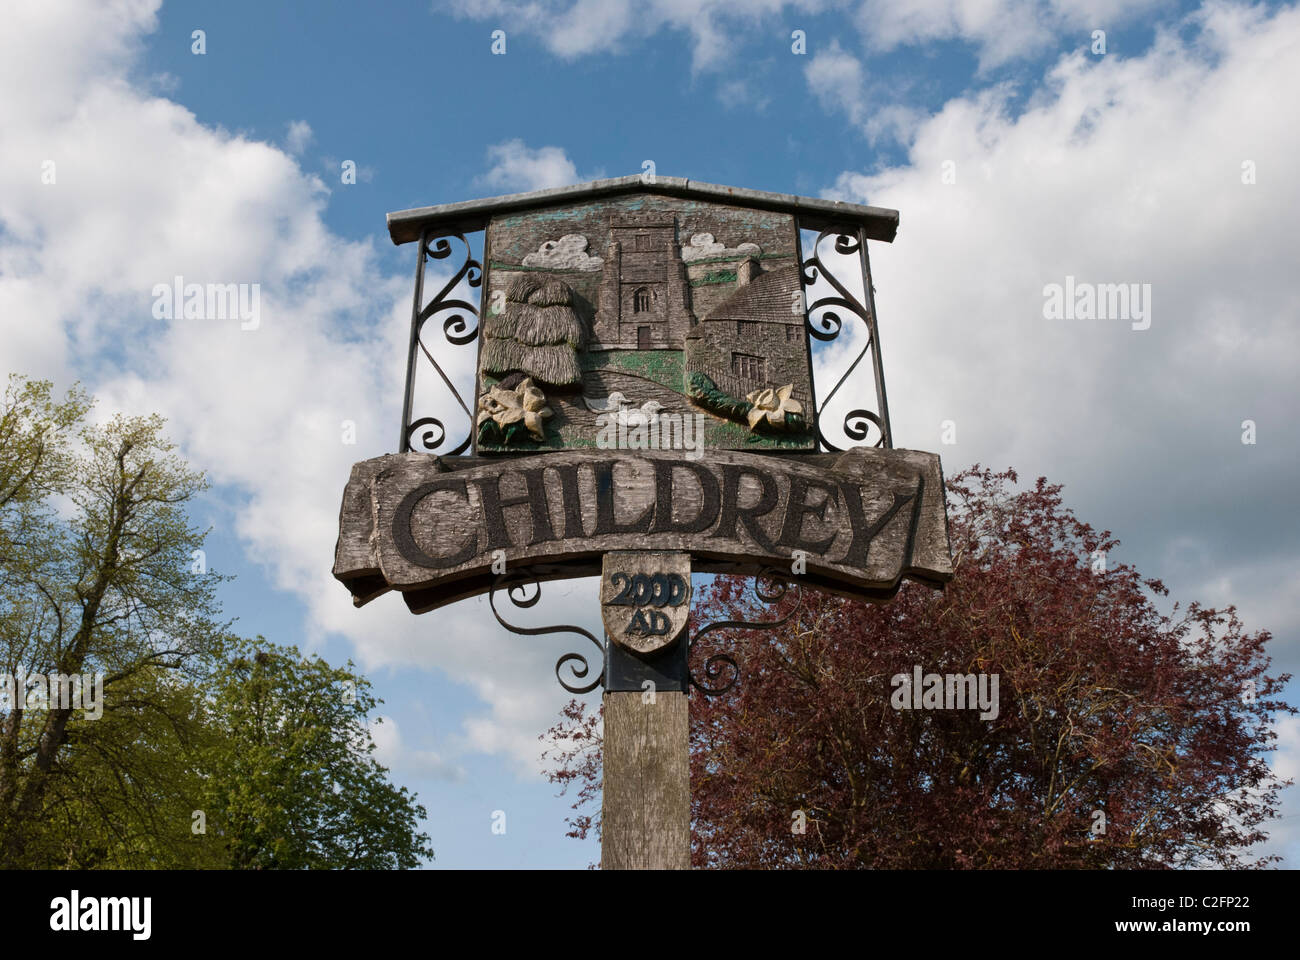 The village sign of Childrey in the Vale of the White Horse, Oxfordshire, England, UK. Stock Photo